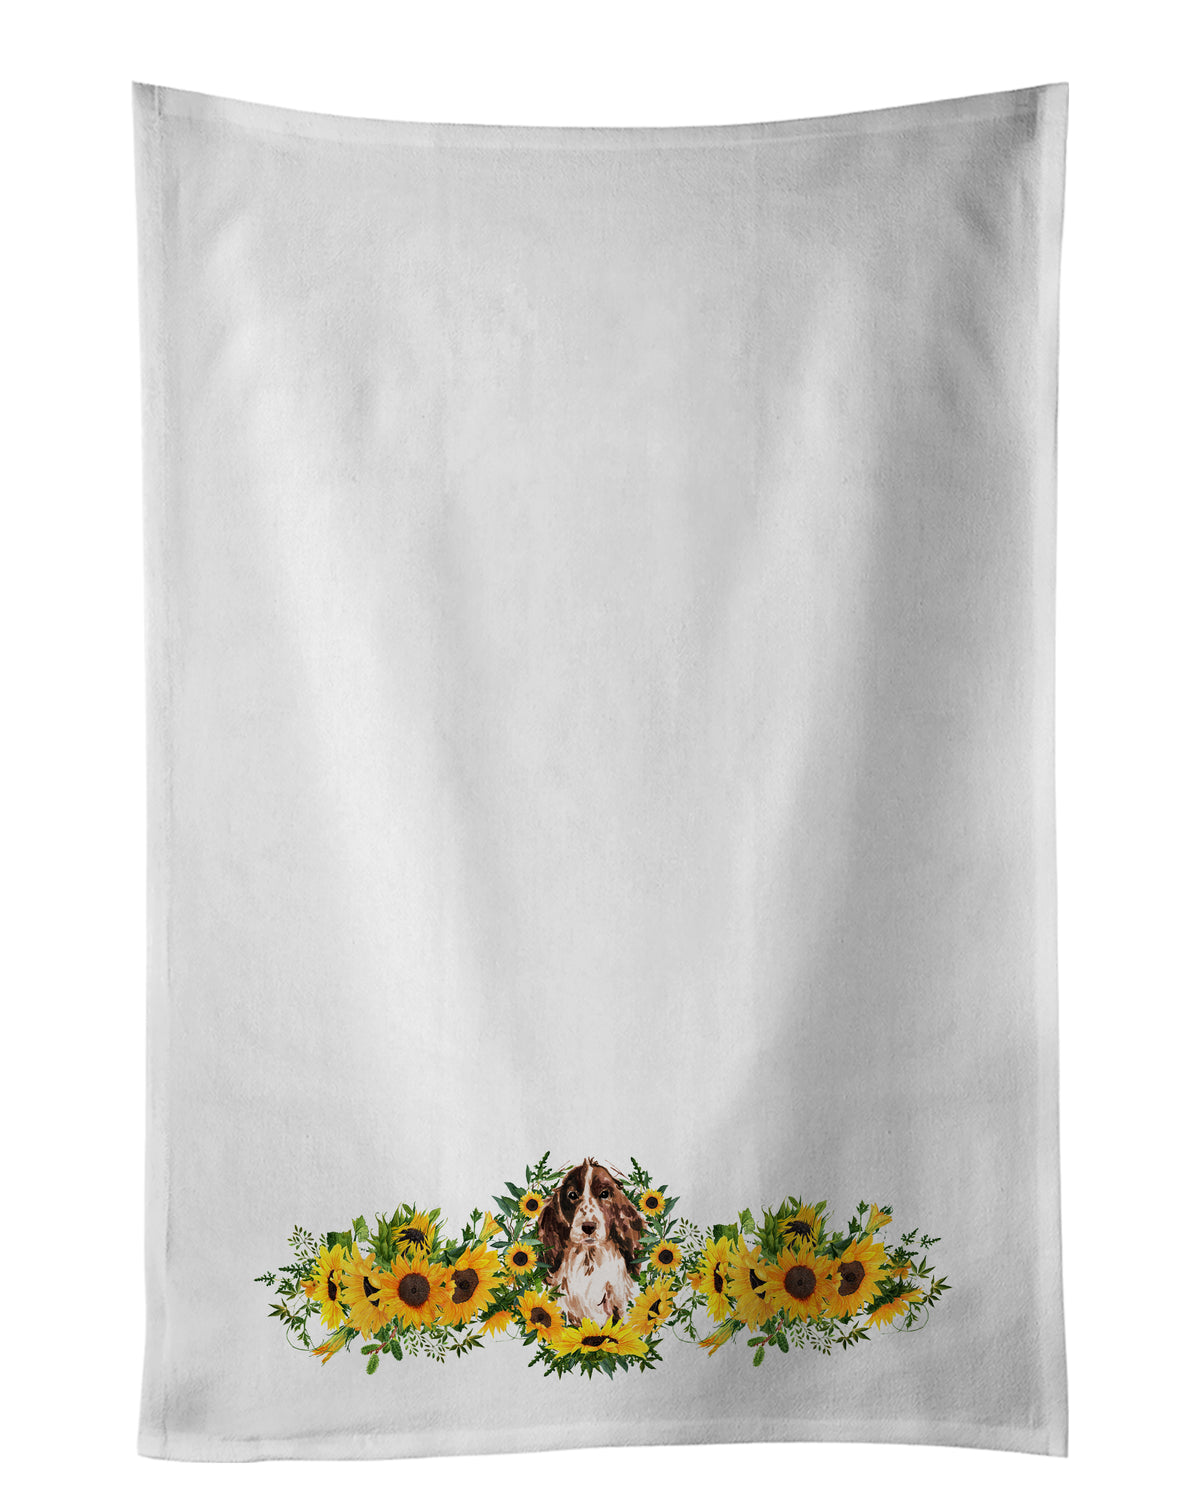 Buy this Brown Parti Cocker Spaniel in Sunflowers White Kitchen Towel Set of 2